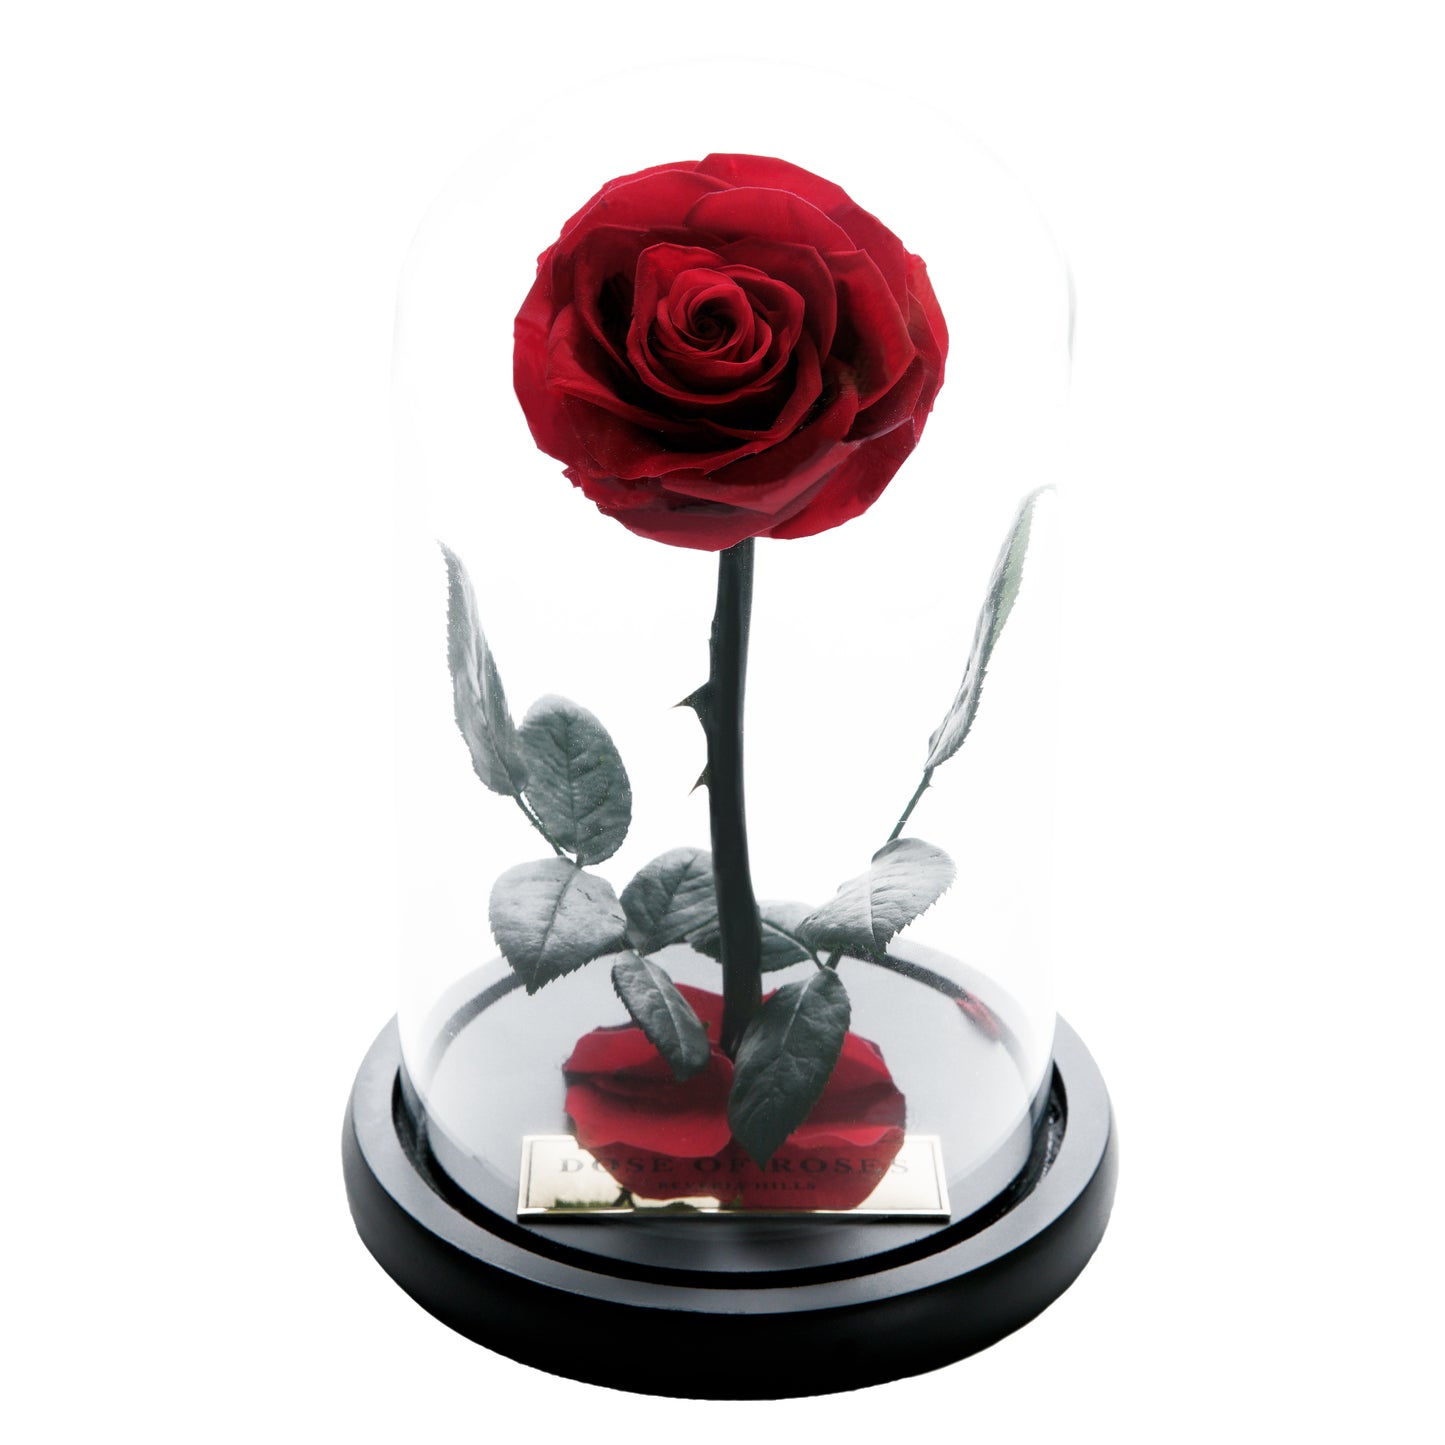 The Forbidden Rose – Red